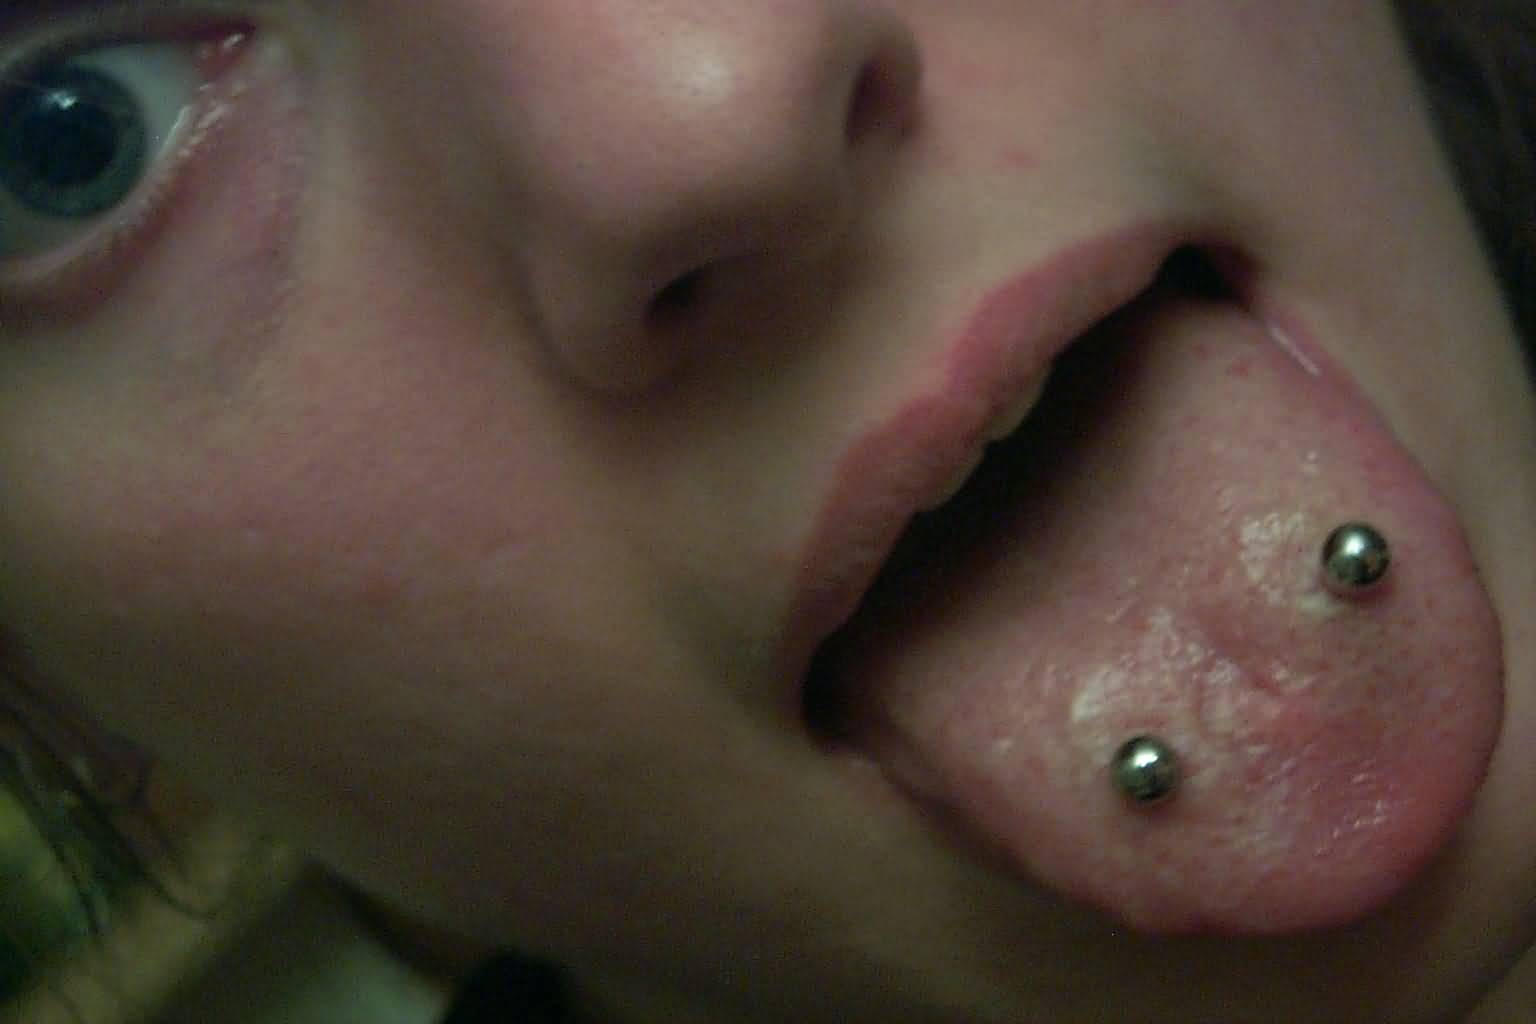 Awesome Venom Piercing Image For Young Girls